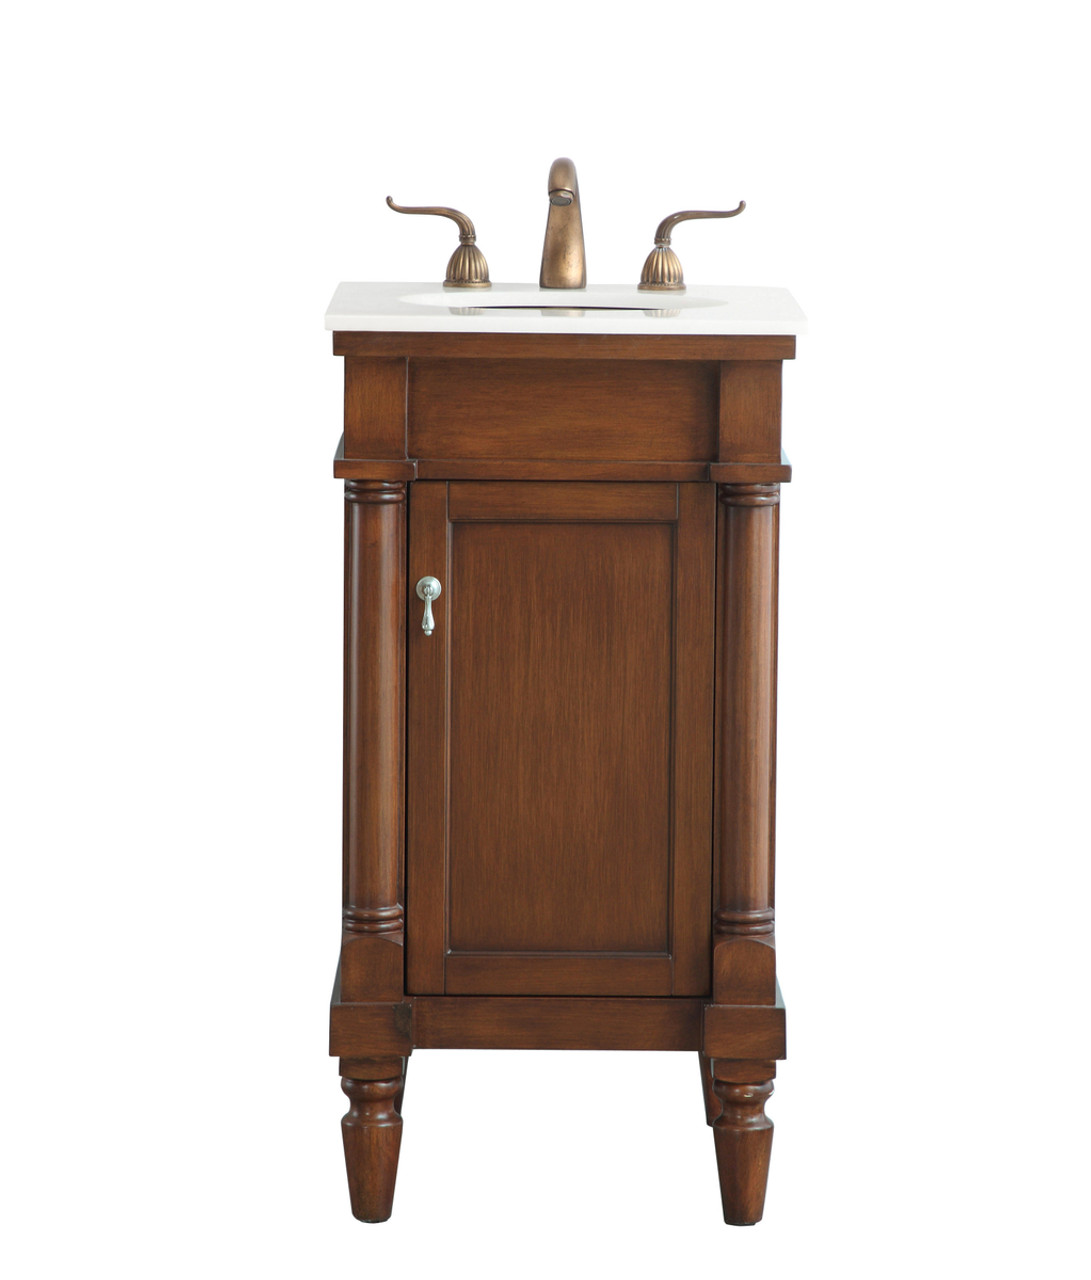 Elegant Kitchen and Bath VF13018WT-VW 18 inch Single Bathroom vanity in walnut with ivory white engineered marble